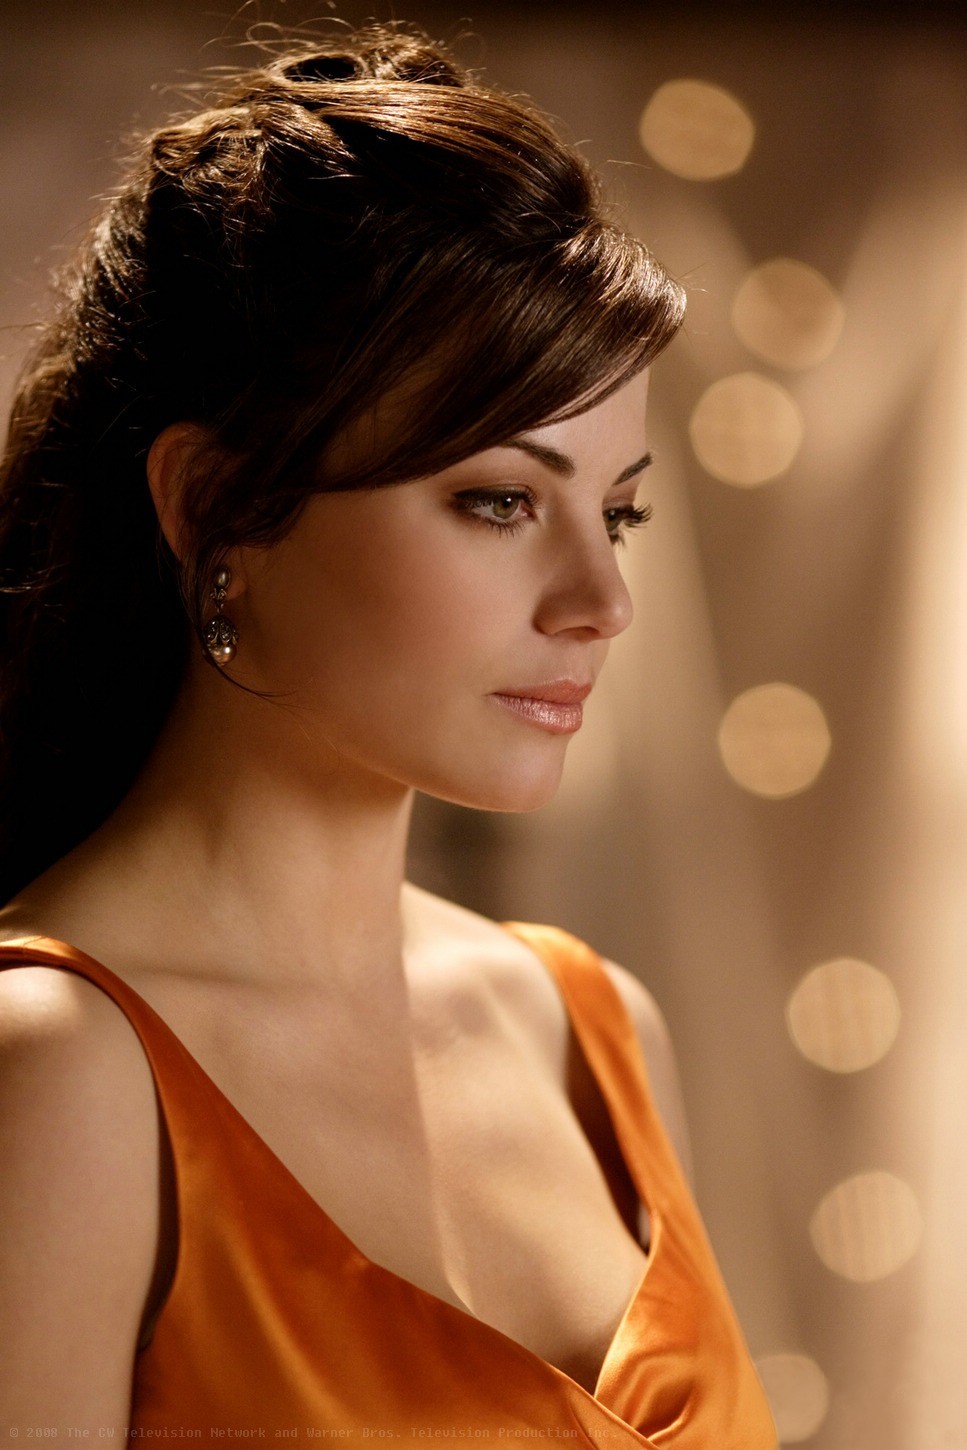 Erica Durance leaked wallpapers